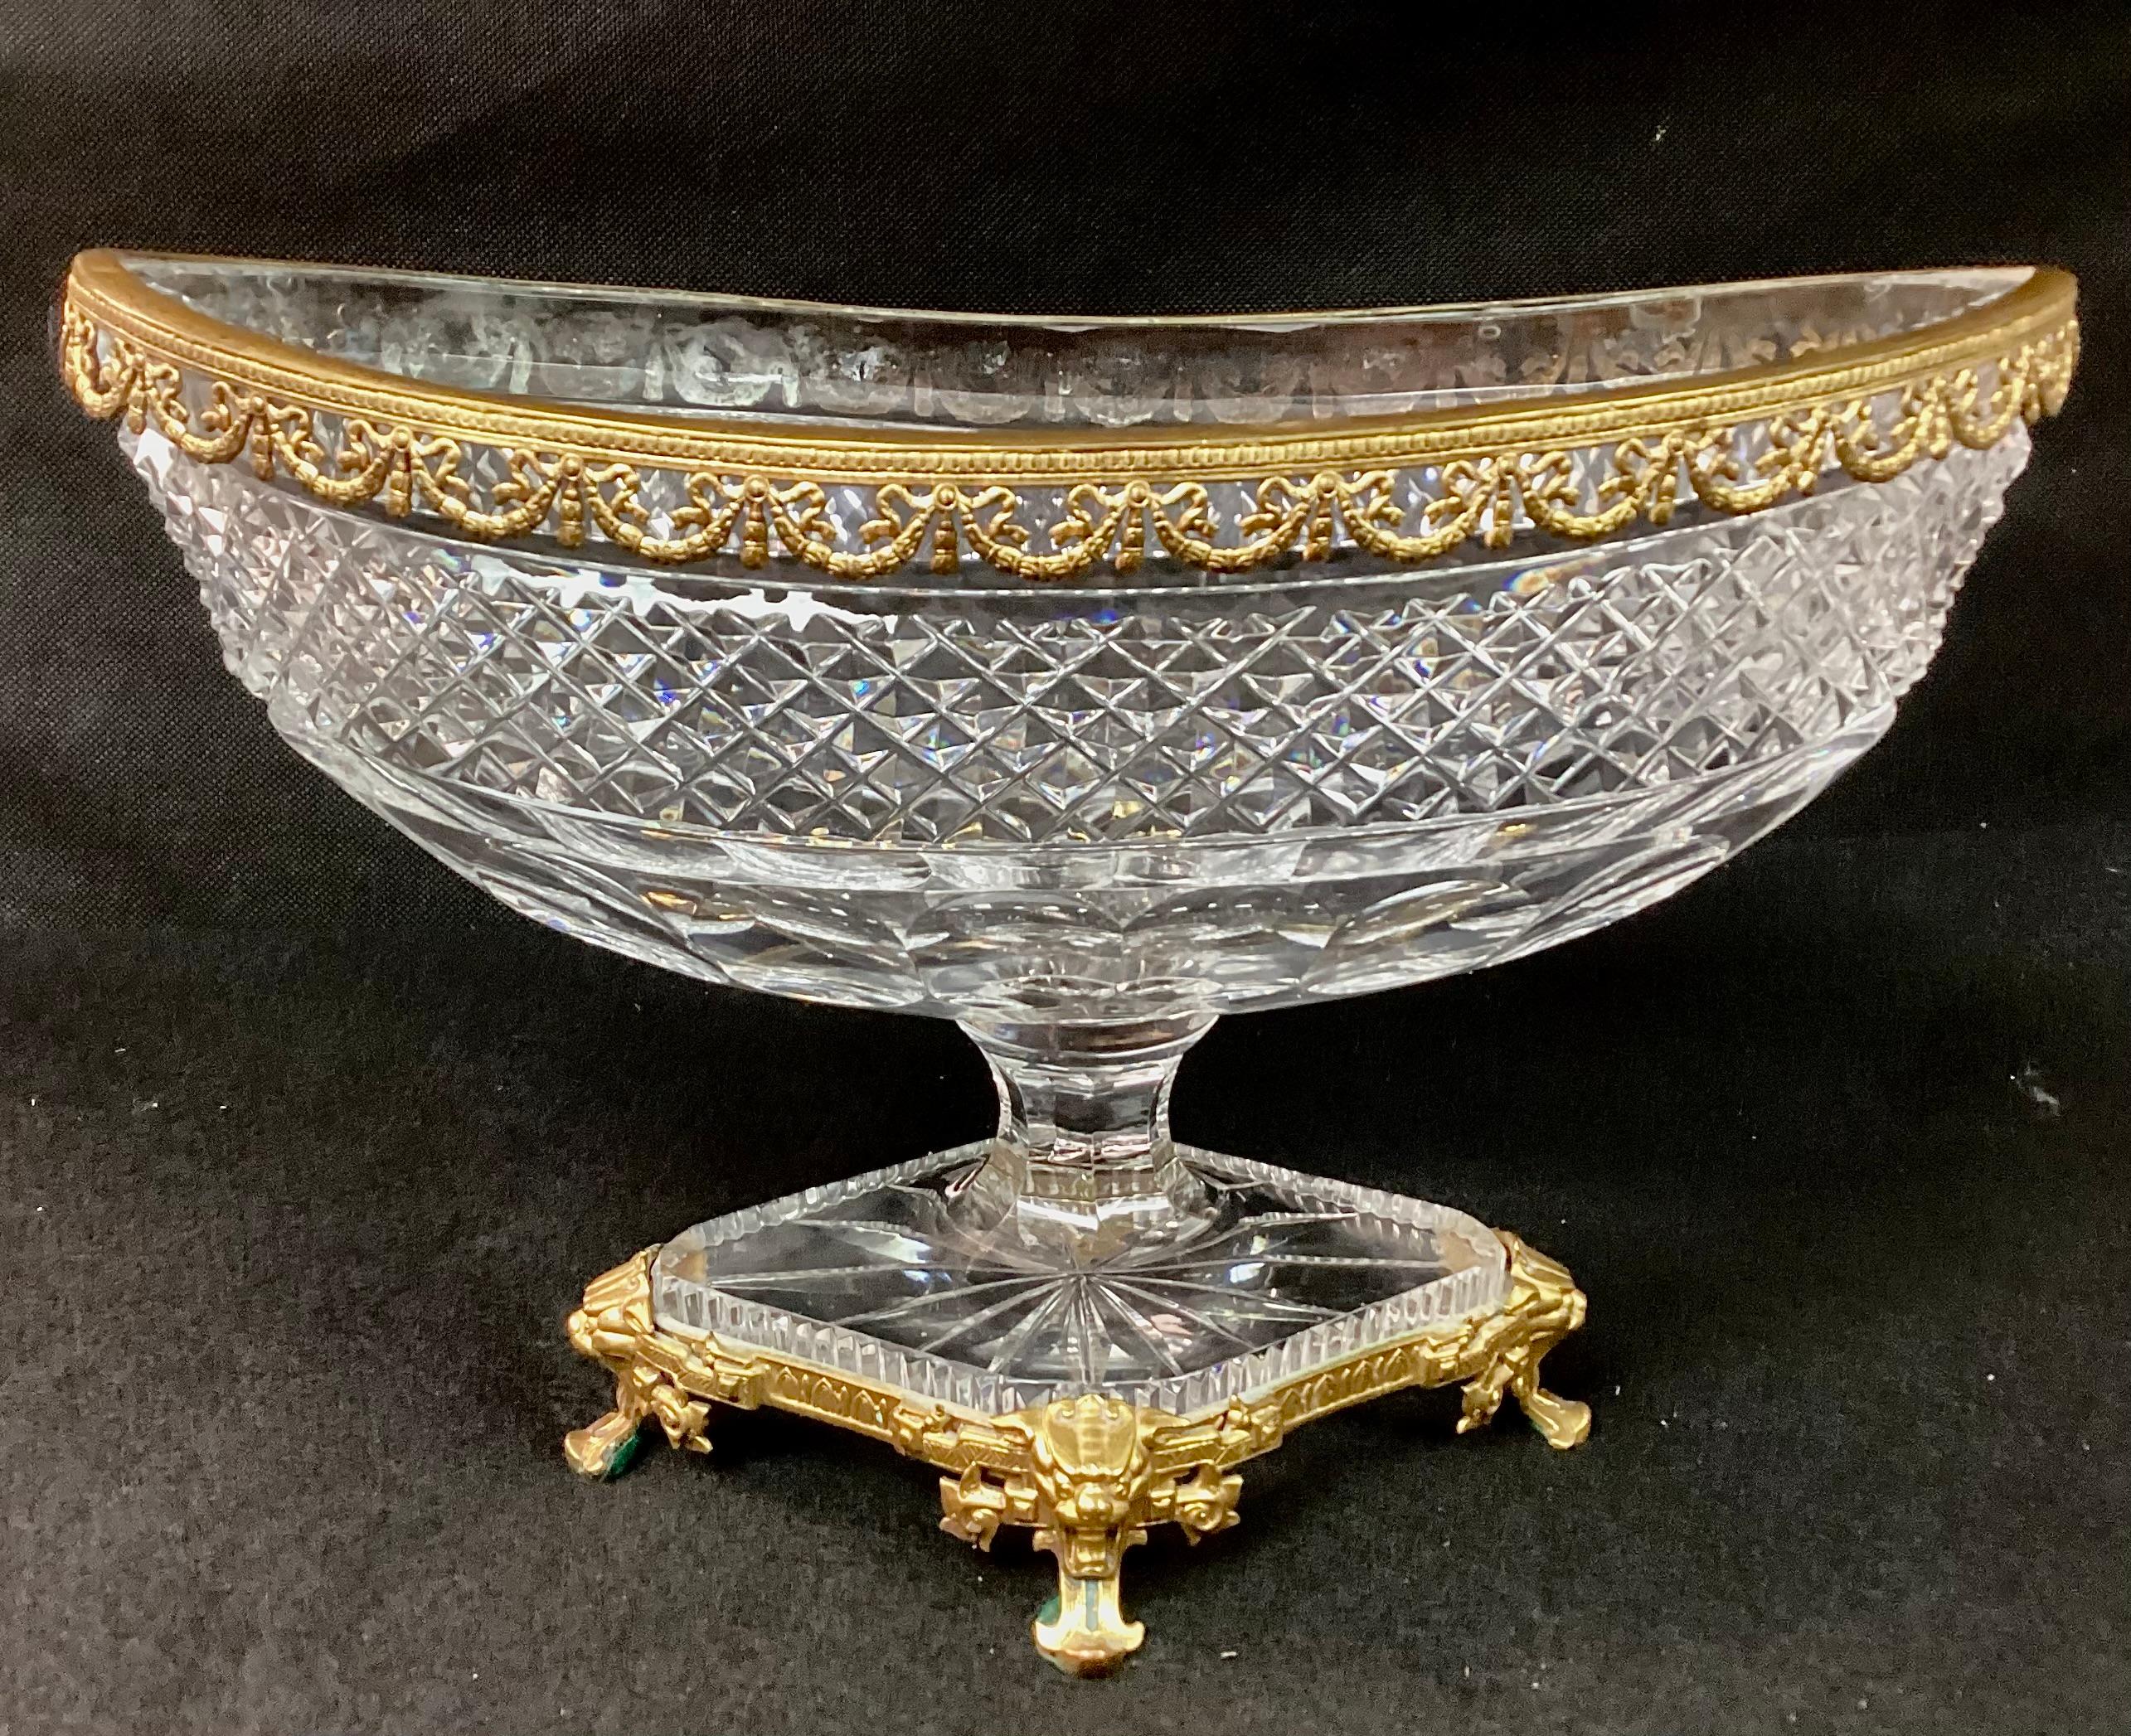 Exquisite Dore bronze and diamond cut crystal oval centerpiece in the style of Baccarat. Crystal bowl and pedestal stand on bronze lion paw feet. Attributed to Baccarat.